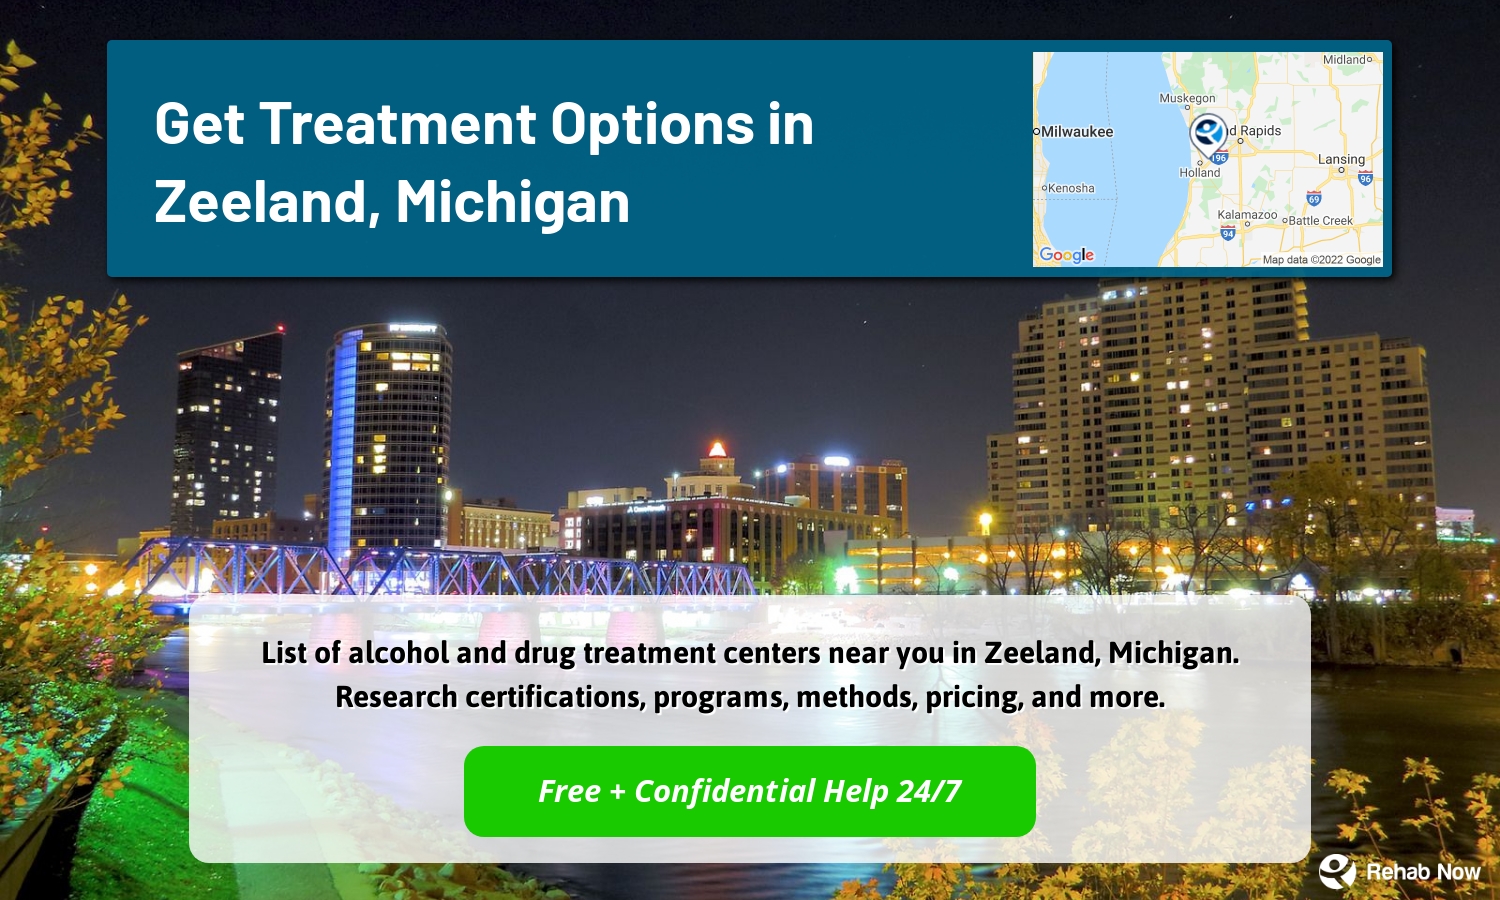 List of alcohol and drug treatment centers near you in Zeeland, Michigan. Research certifications, programs, methods, pricing, and more.